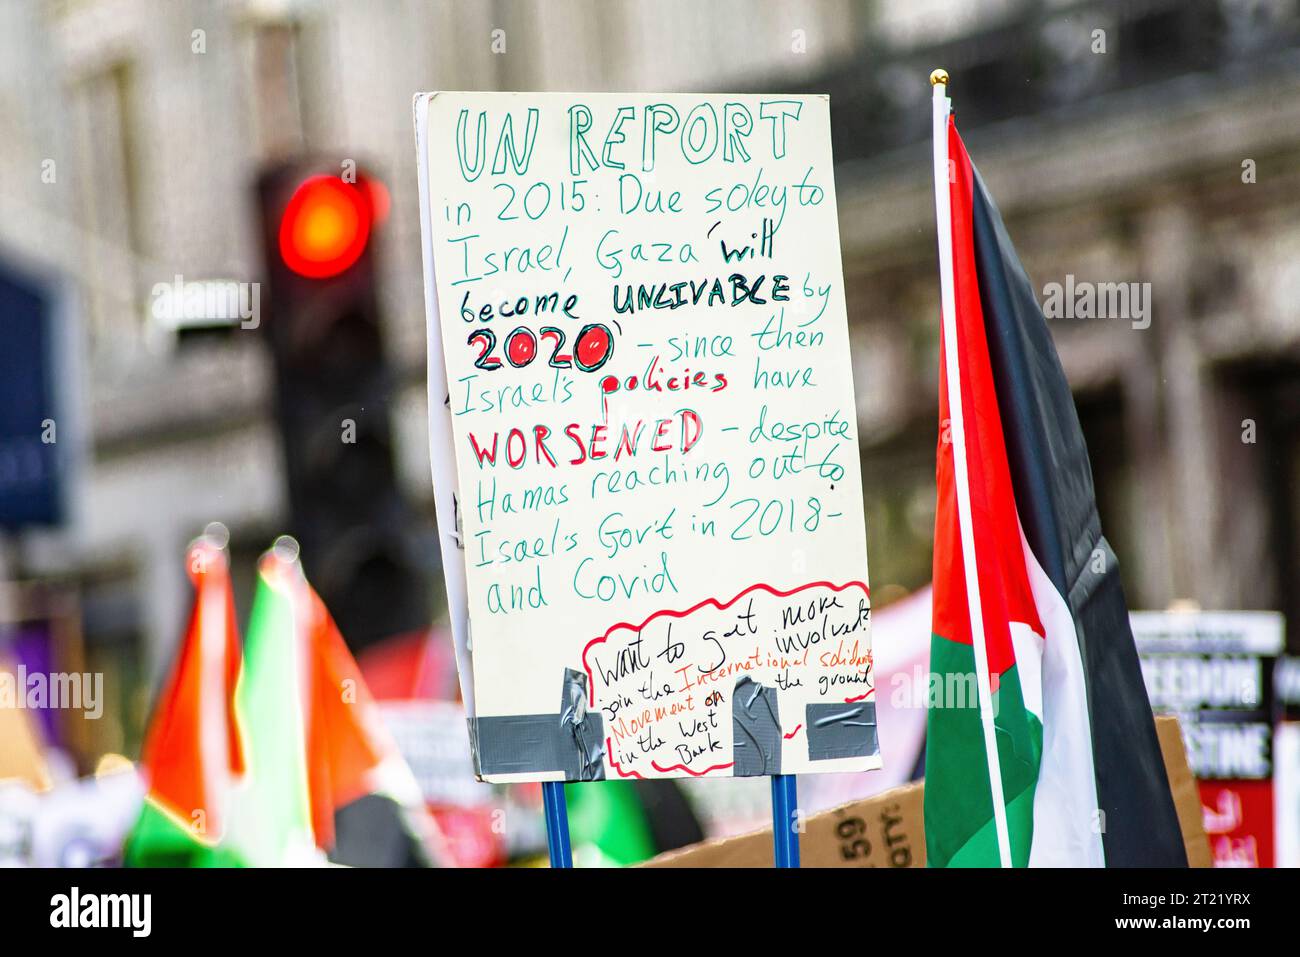 People take part in a demonstration in support of Palestine on October 14, 2023 in London, England Stock Photo